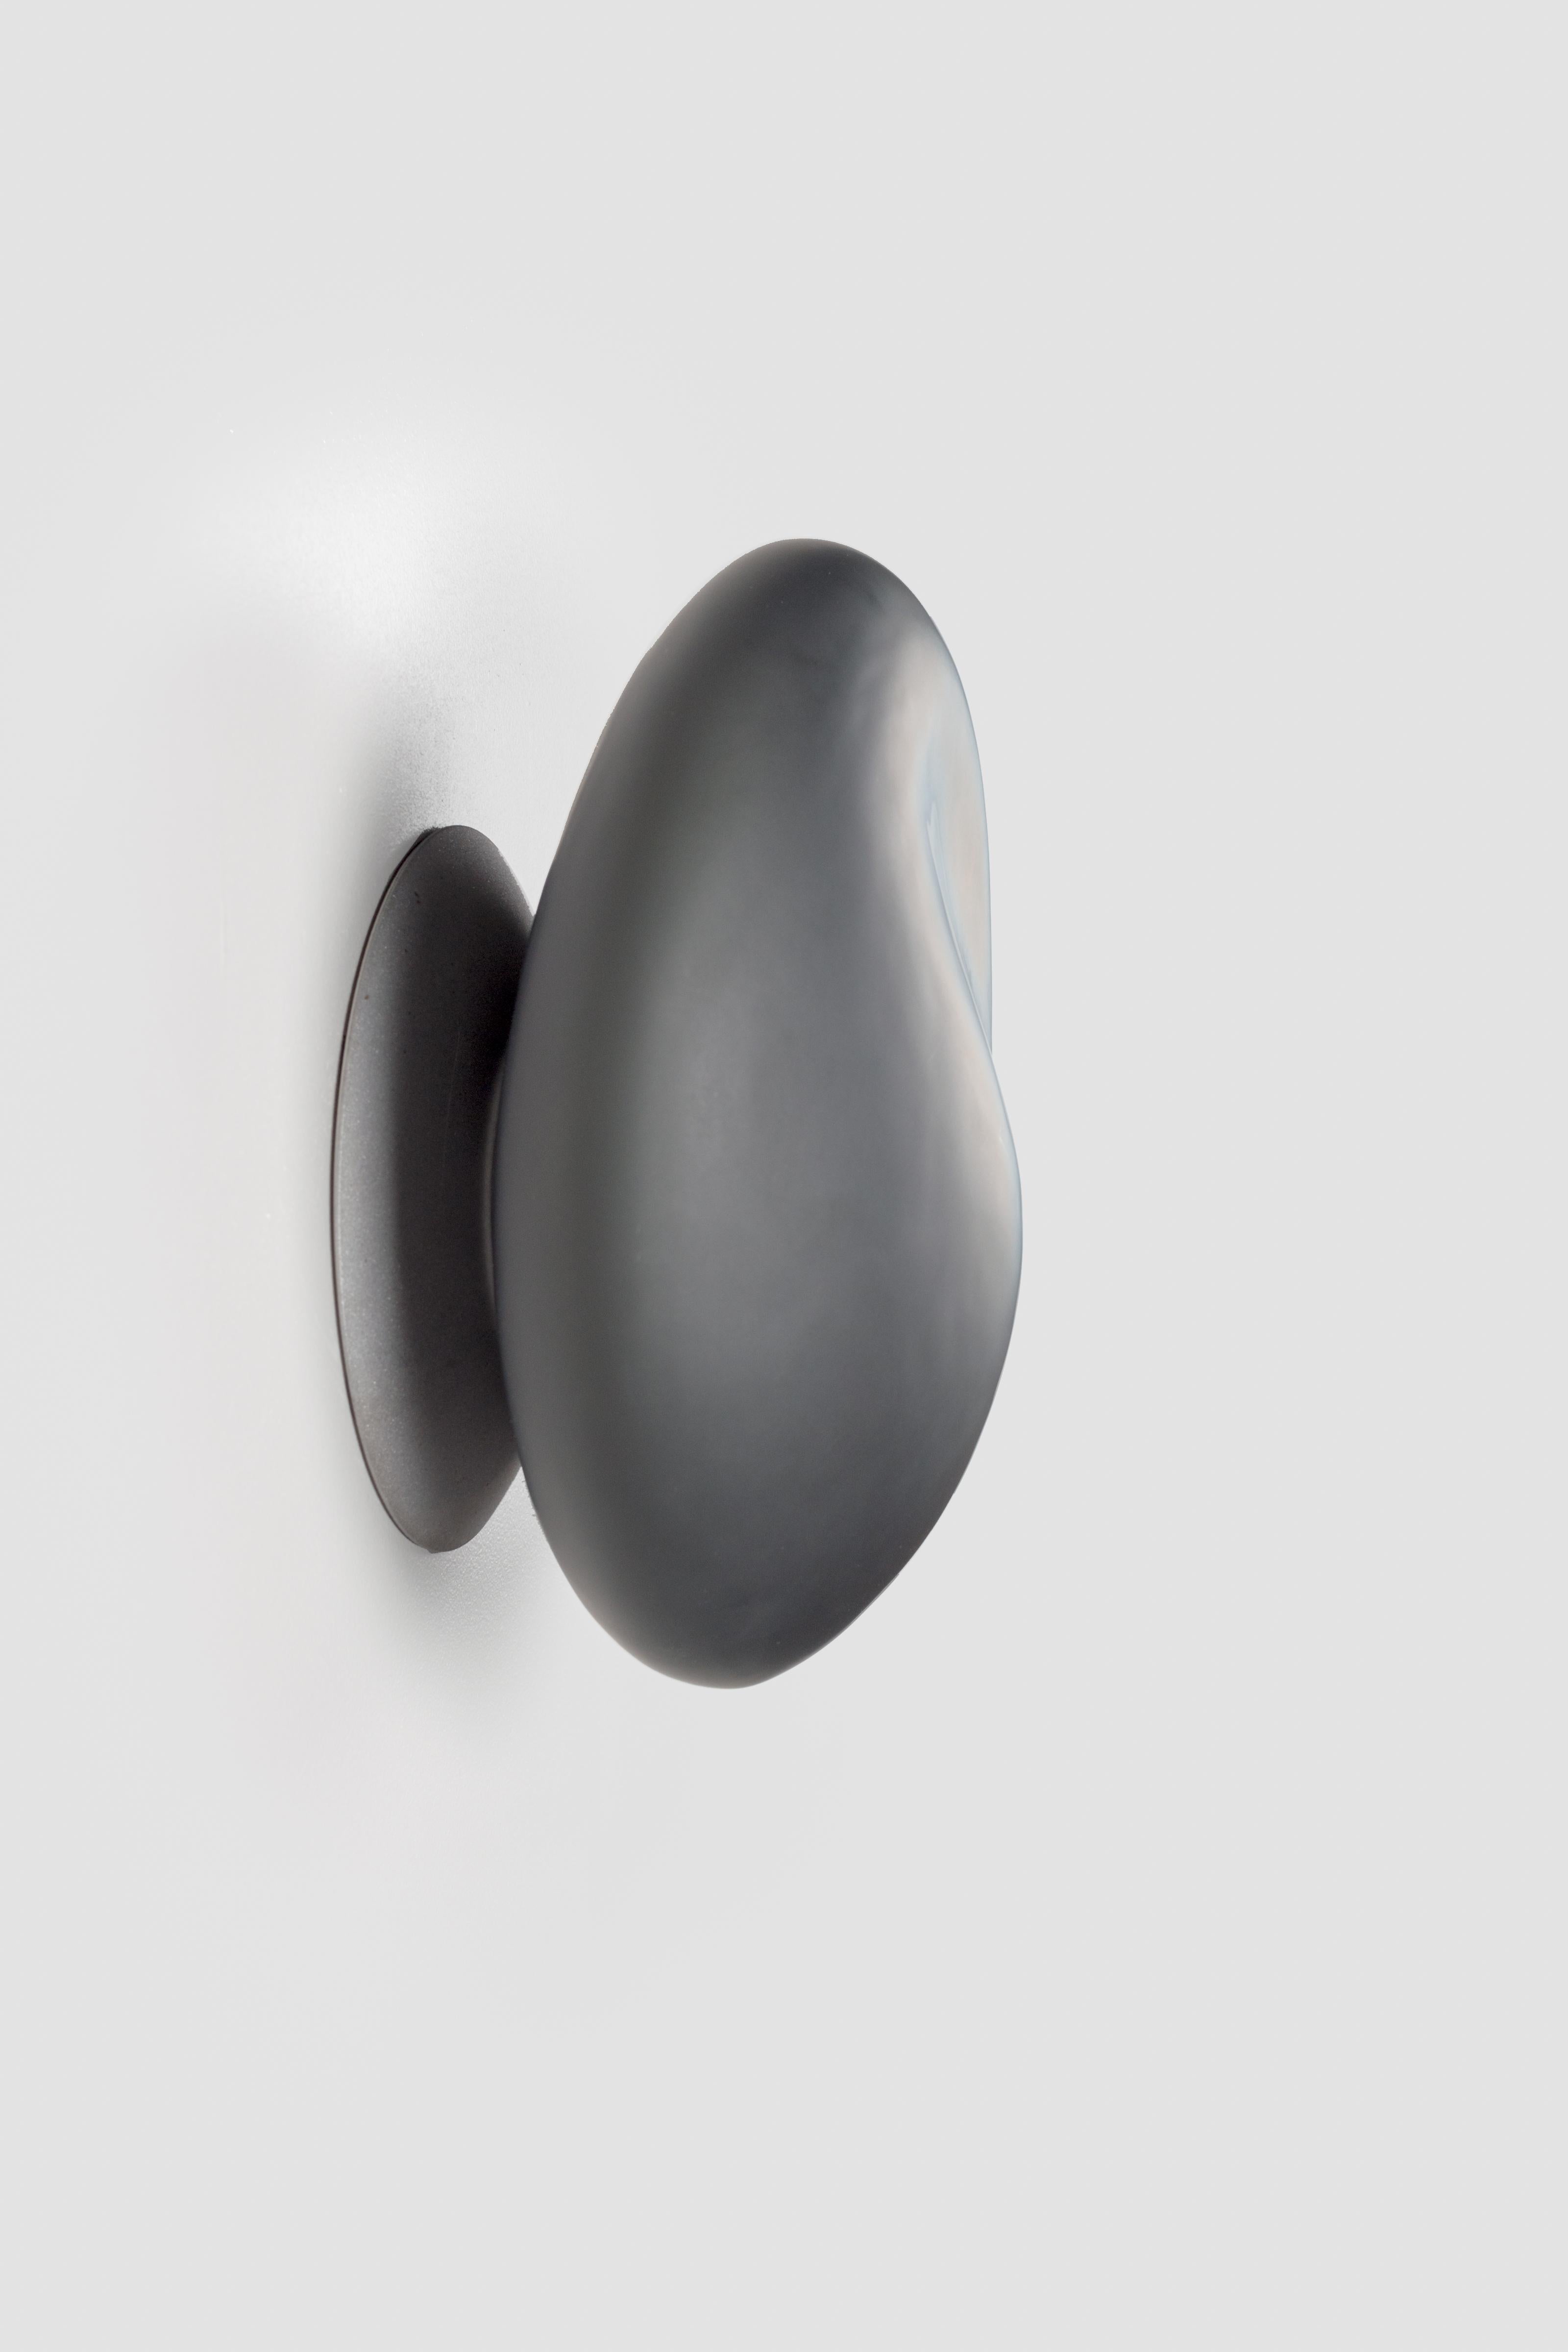 Glass Contemporary Wall Lamp 'Pebble' by Andlight, Shape D, Slate For Sale